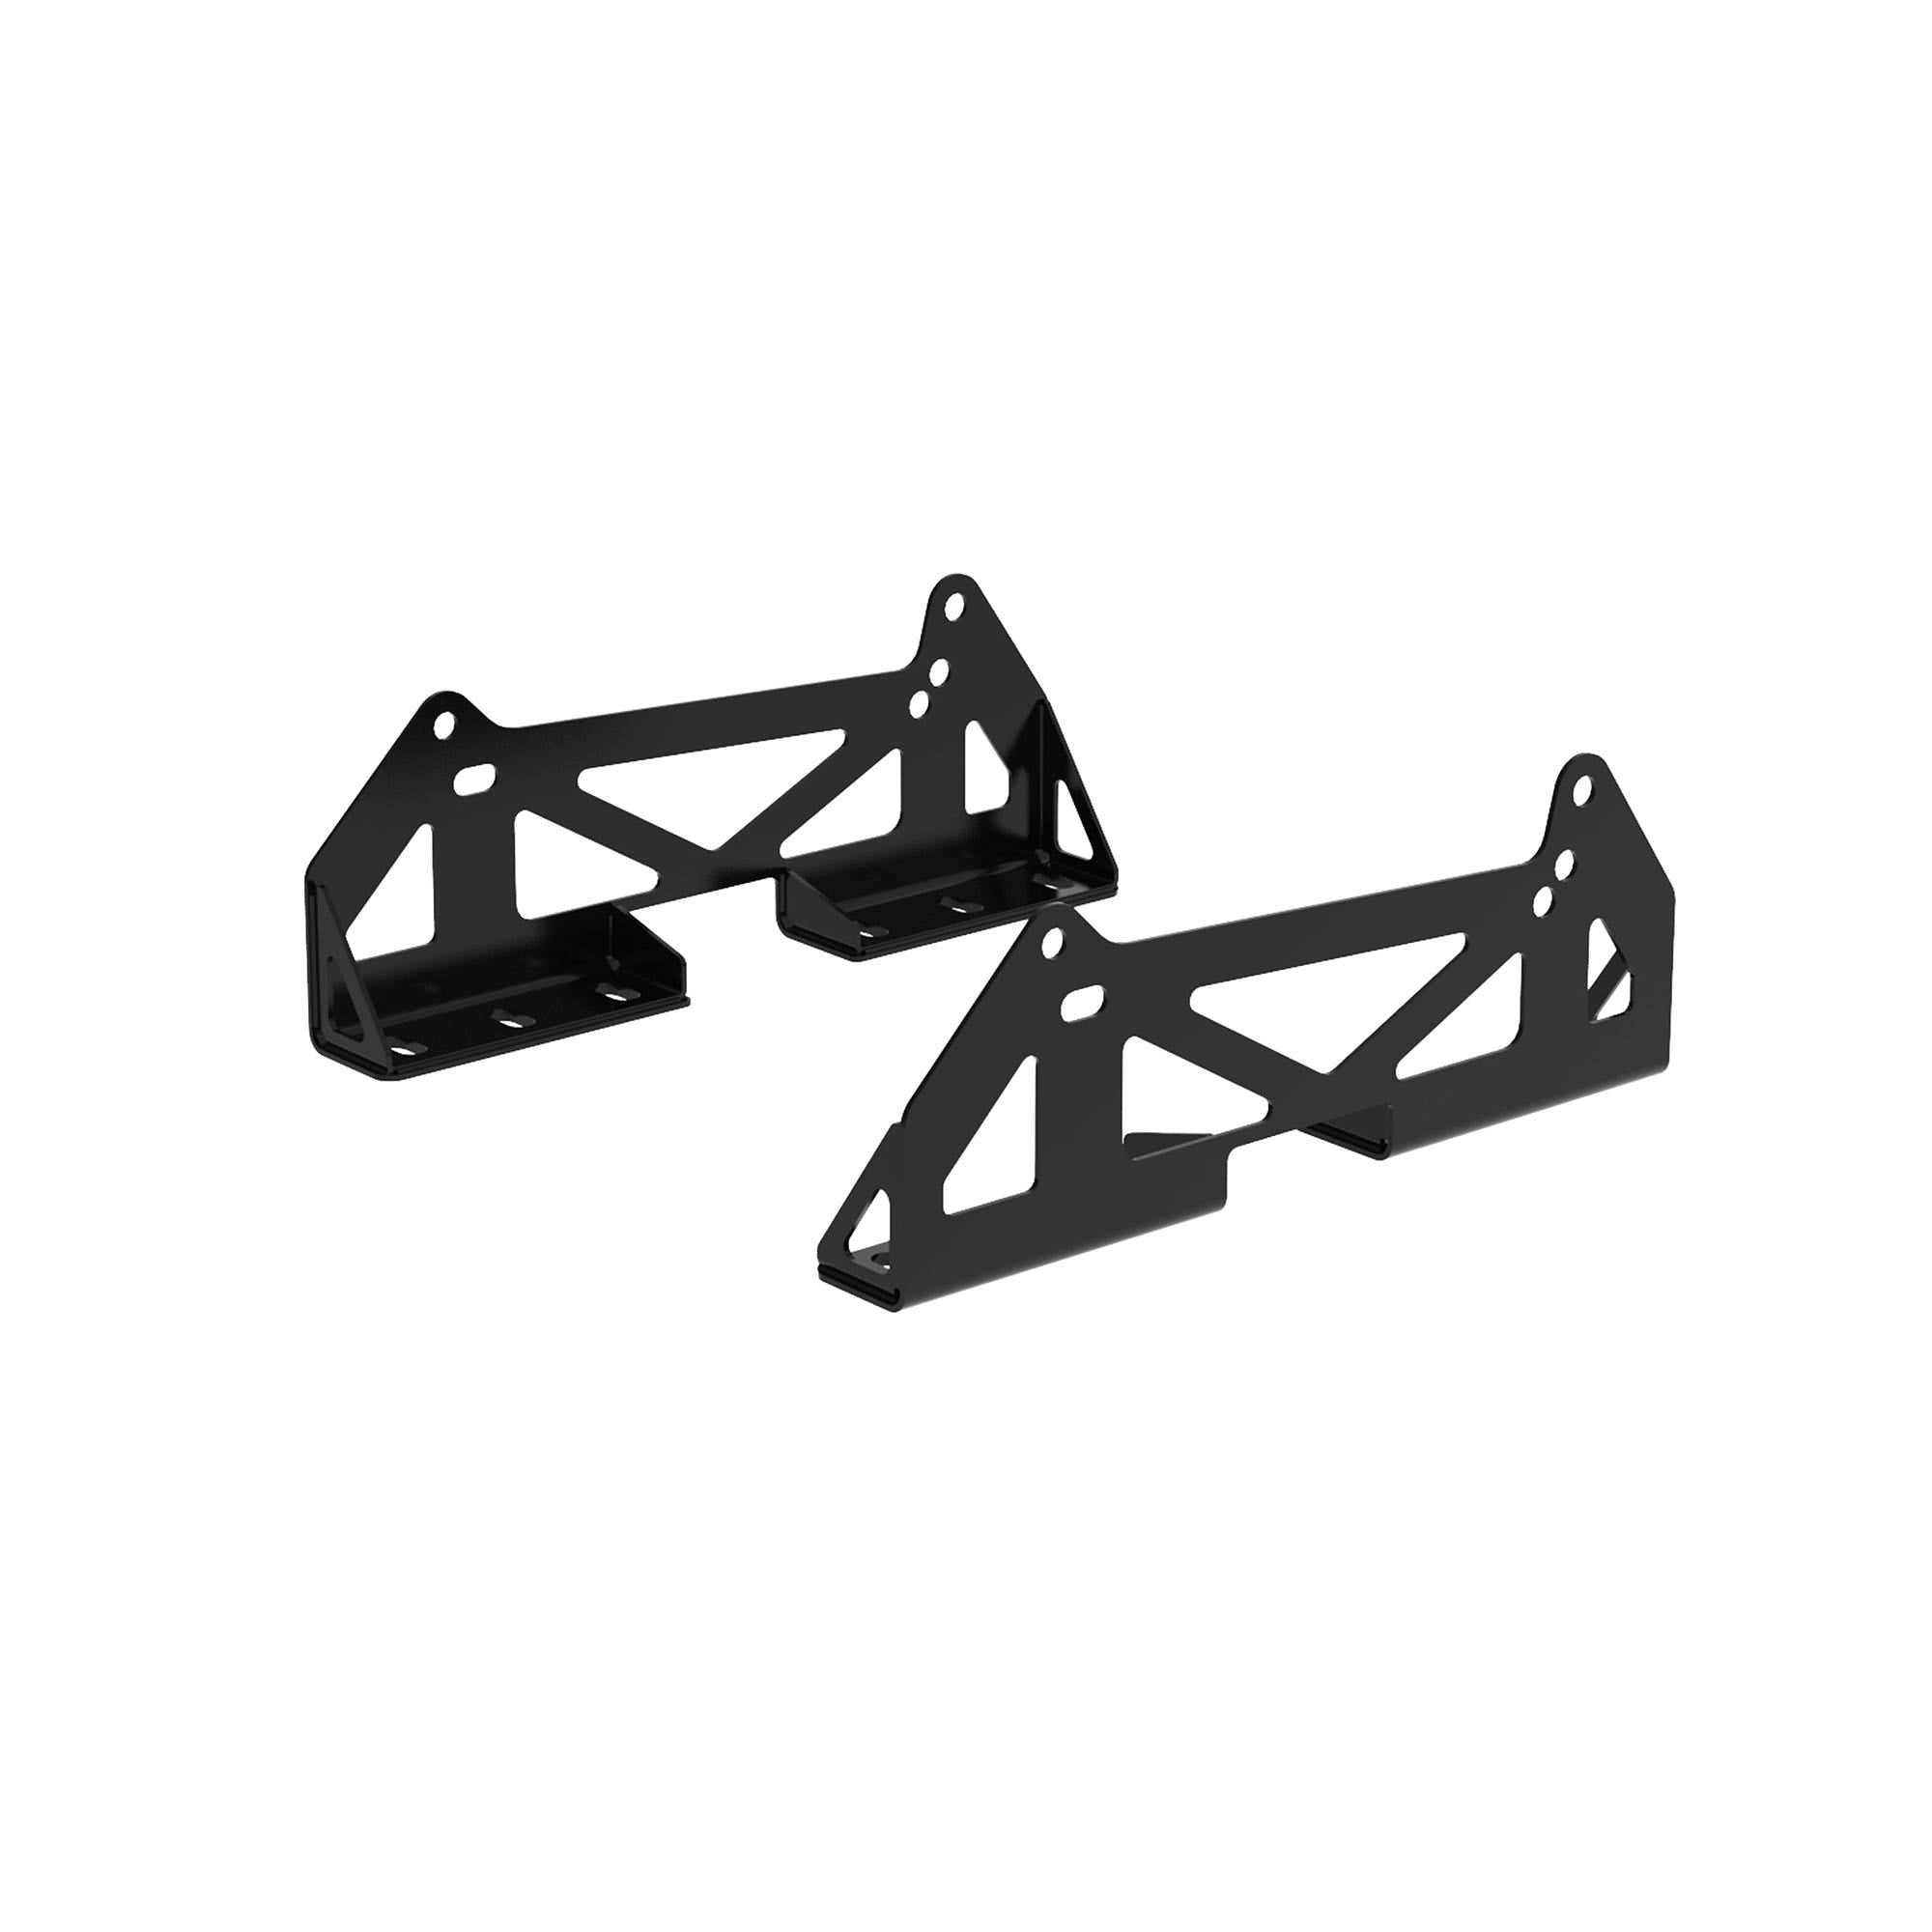 ADV-XT 8855-2021 SIDE MOUNTING FRAMES HIGH - Sparco Shop